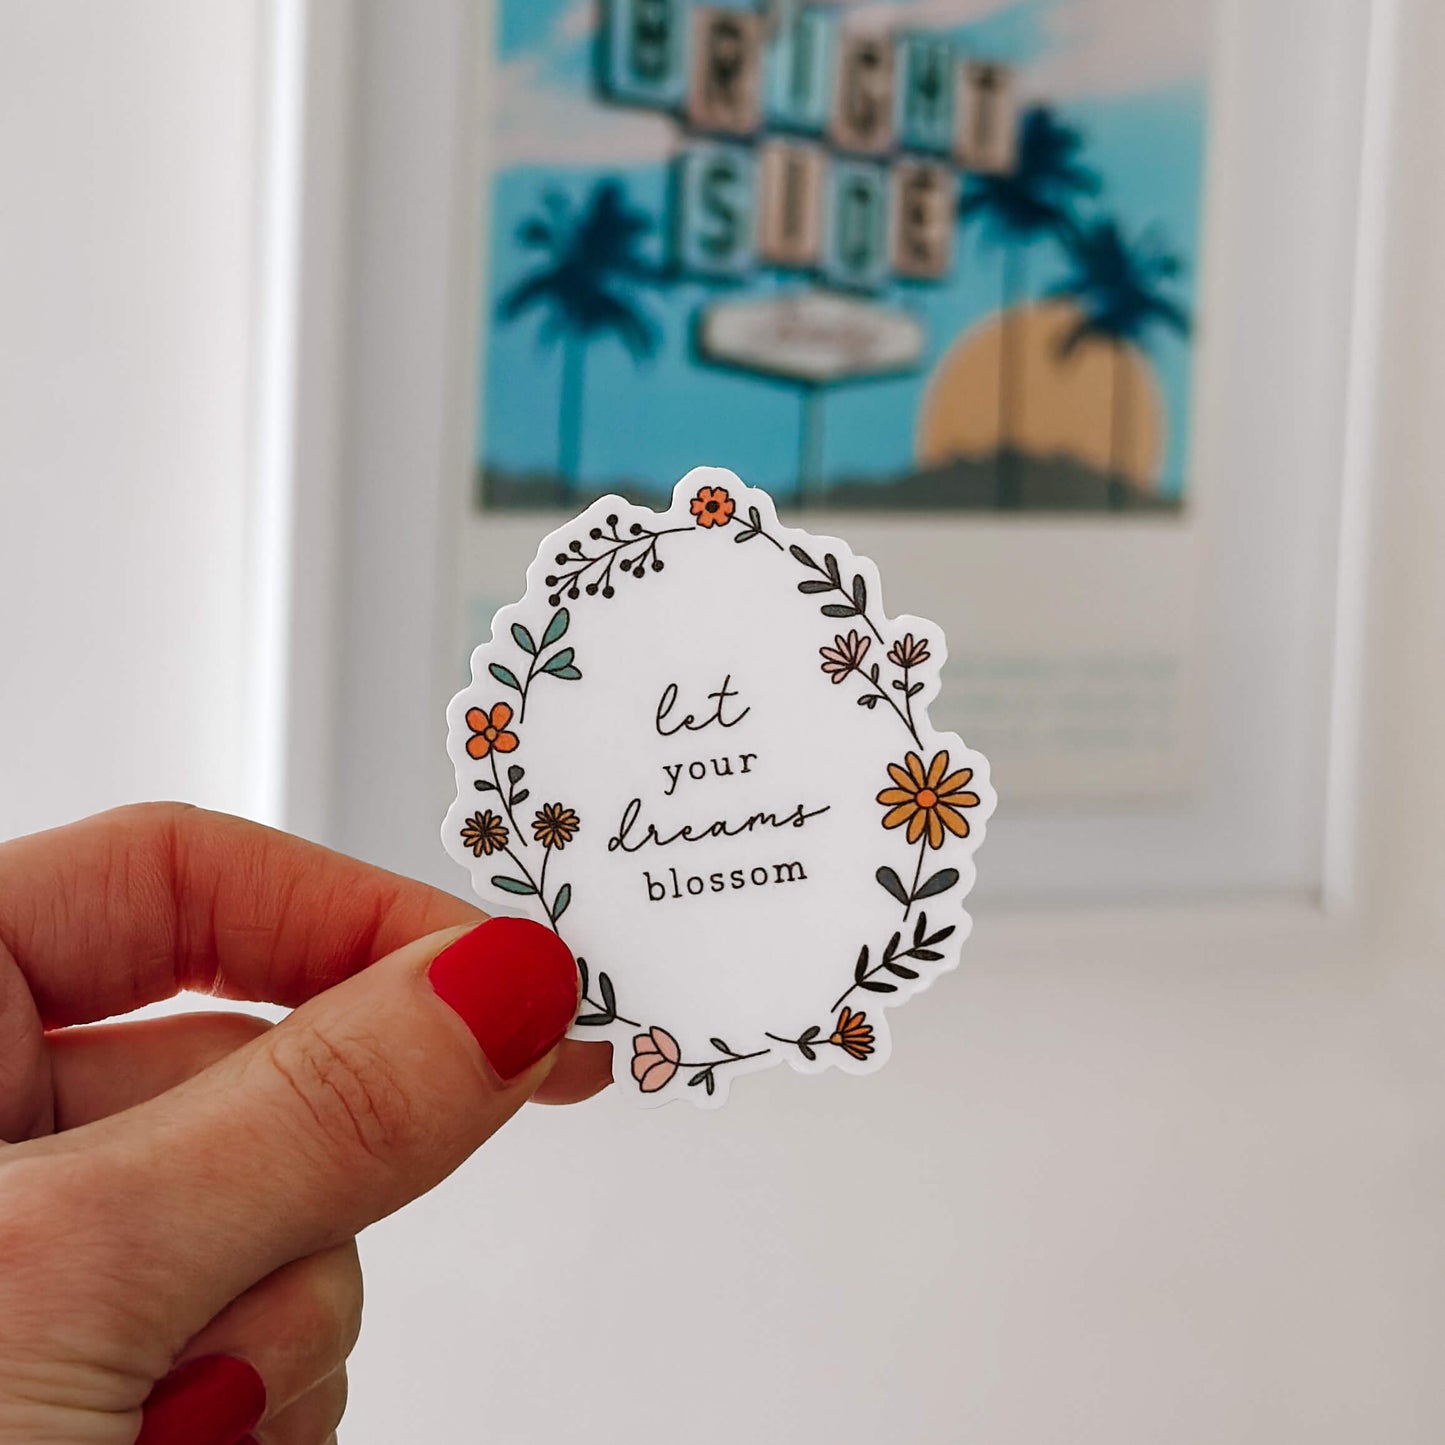 Hand holding vinyl sticker with flower illustration and the words 'et your dreams blossom' 